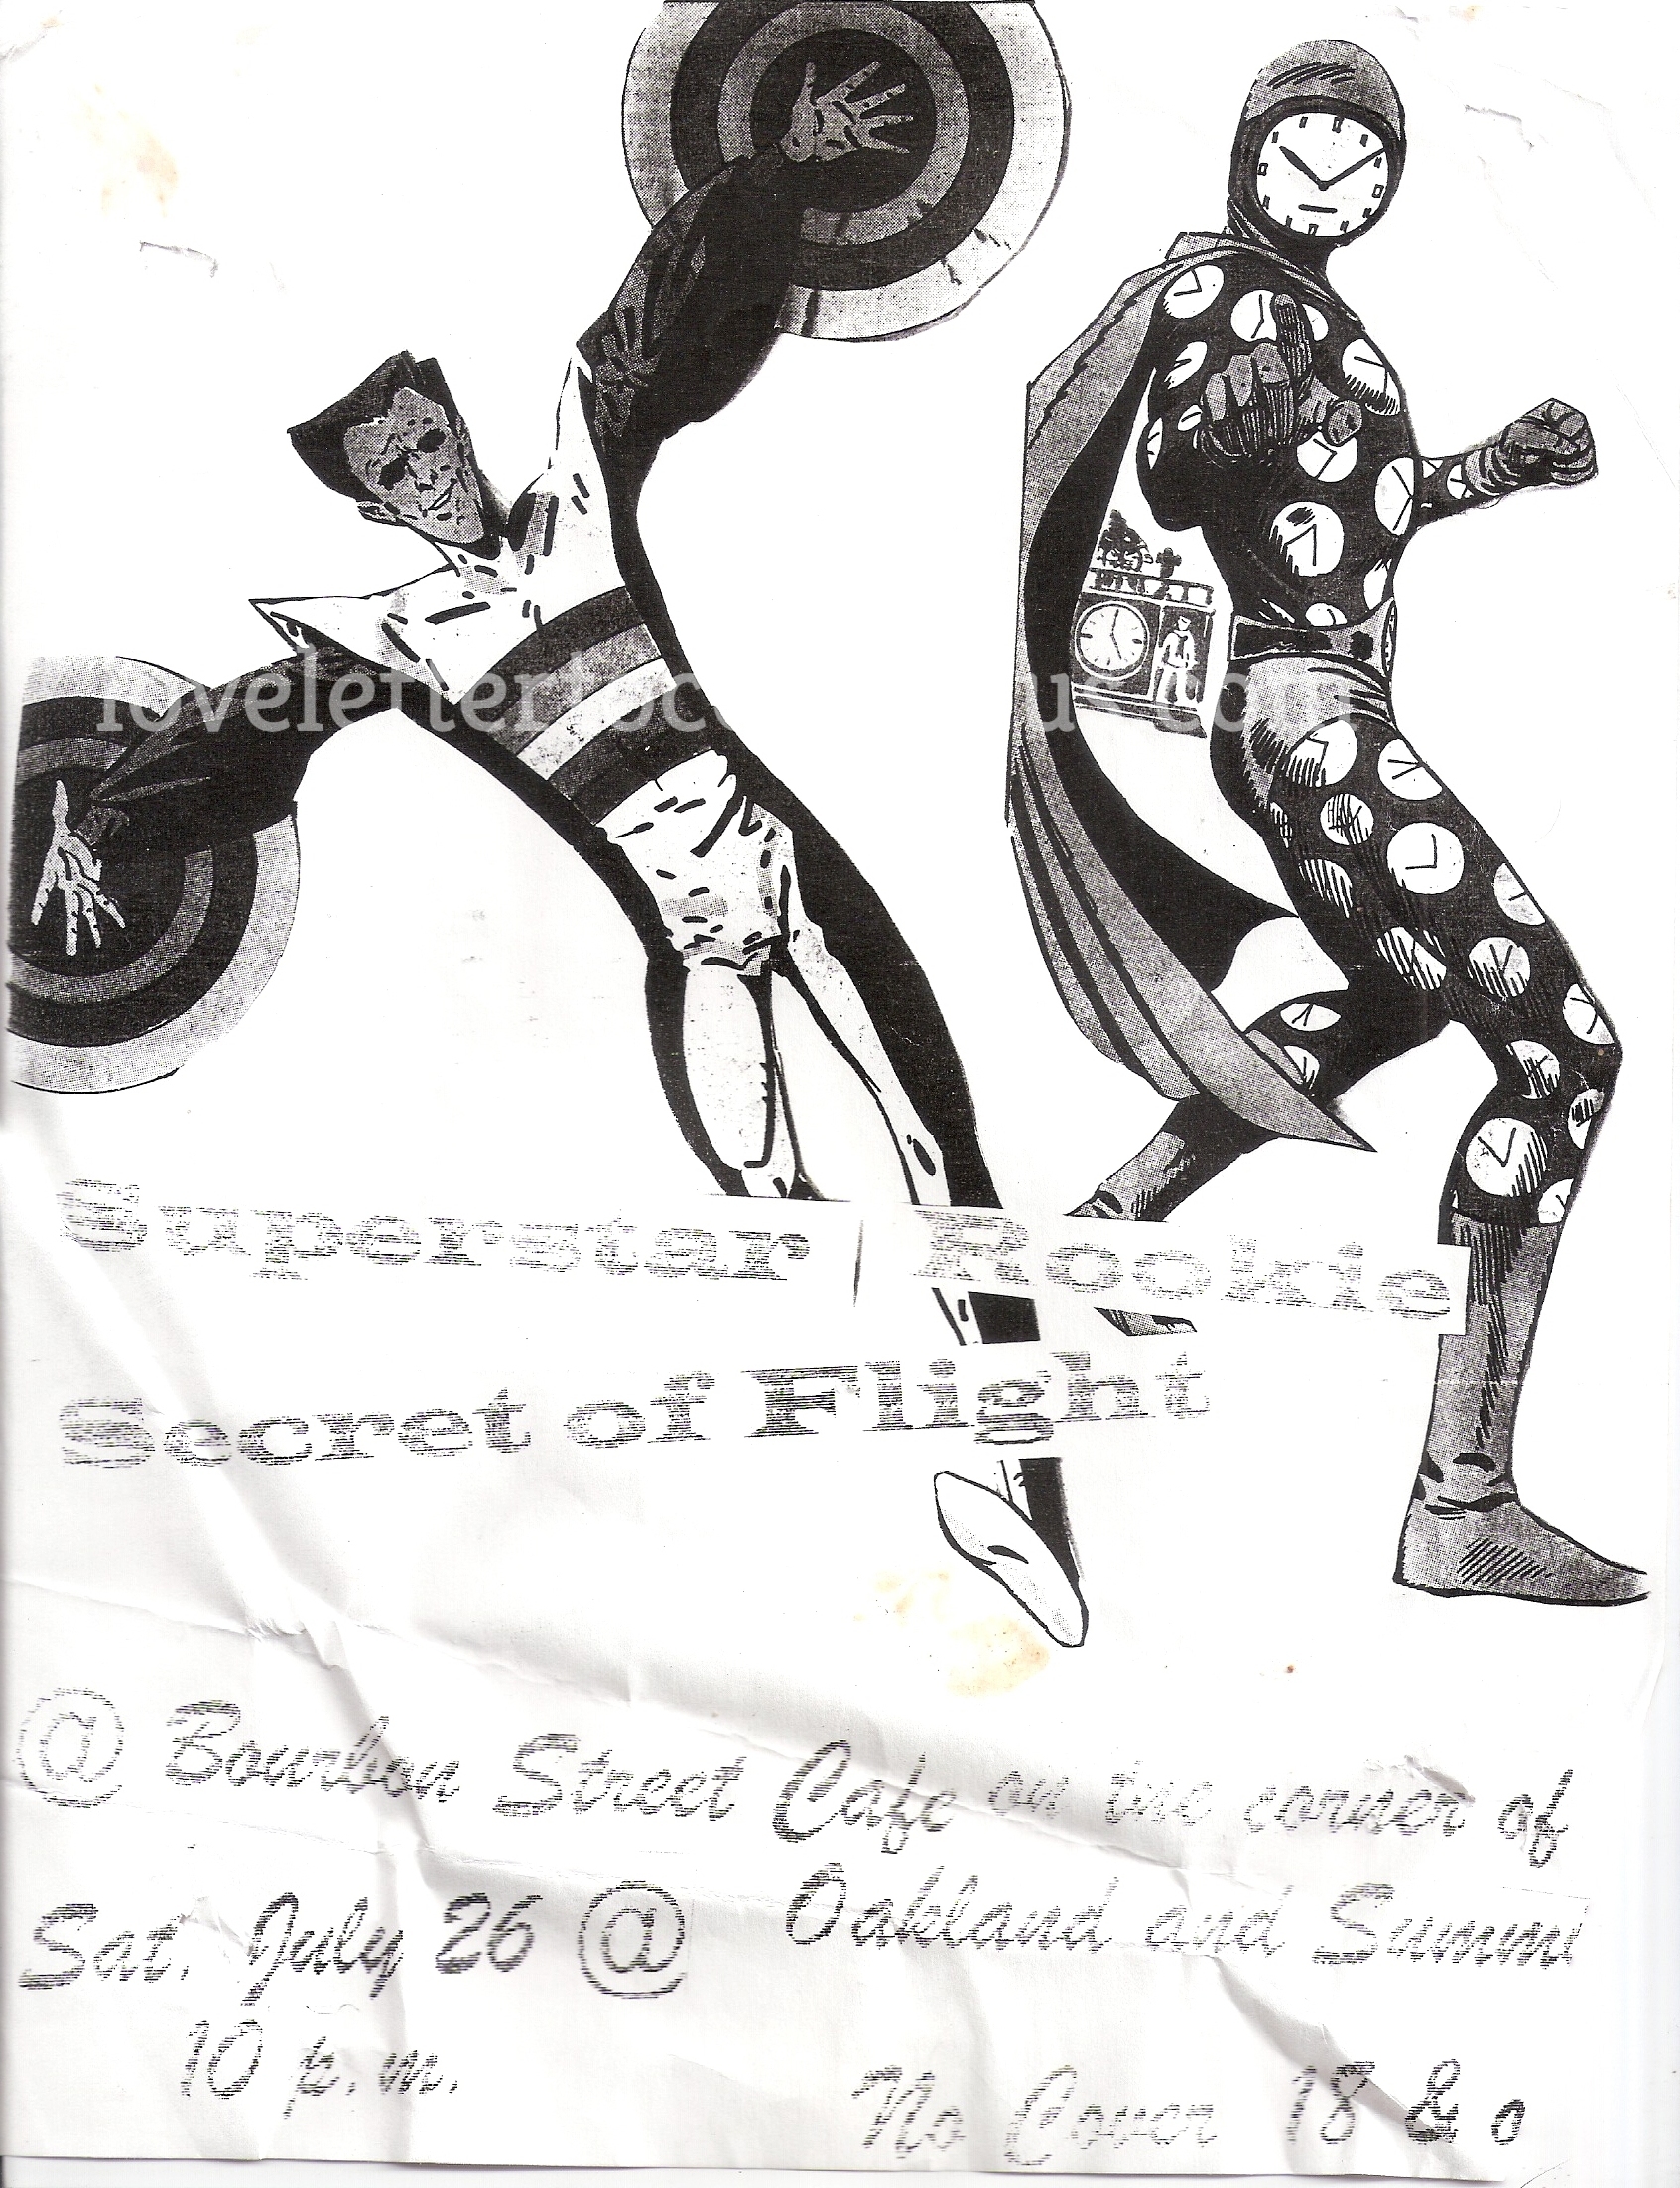 superhero poster from Superstar Rookie's debut performance, Cafe Bourbon Street